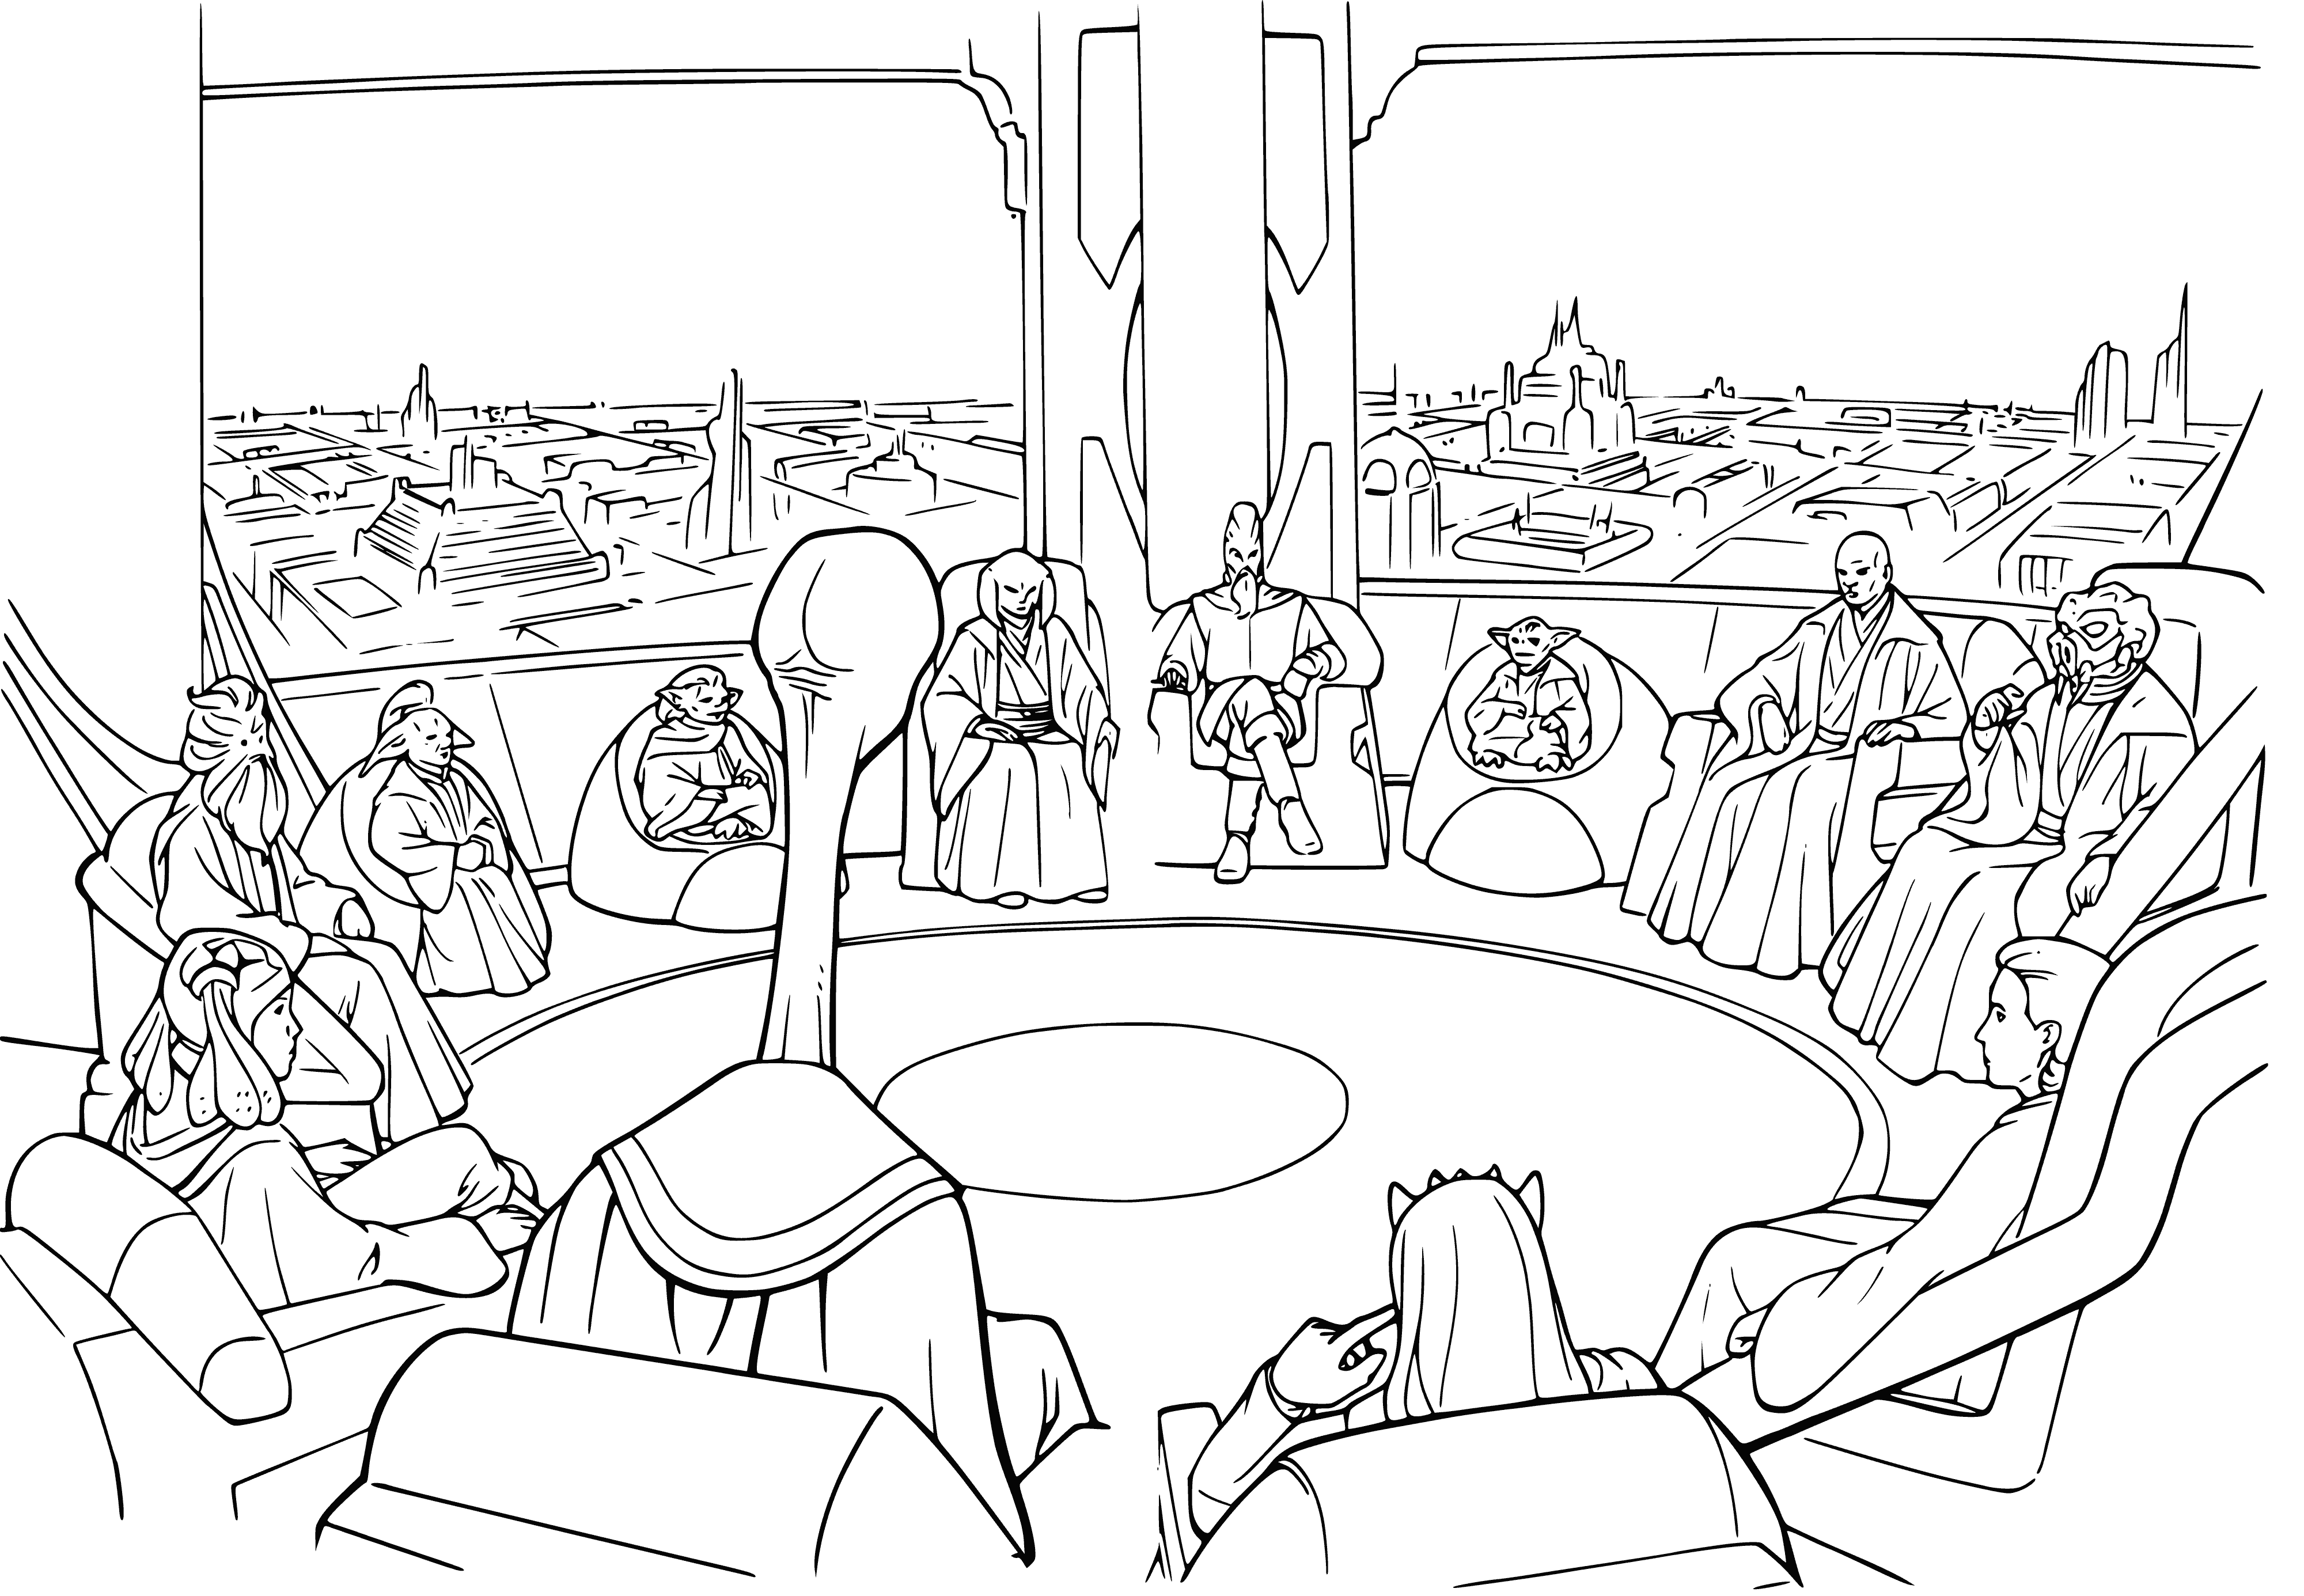 coloring page: Jedi Council discusses recent attack on Naboo ship, wise & powerful Jedi Knights around large conference table. #PhantomMenace